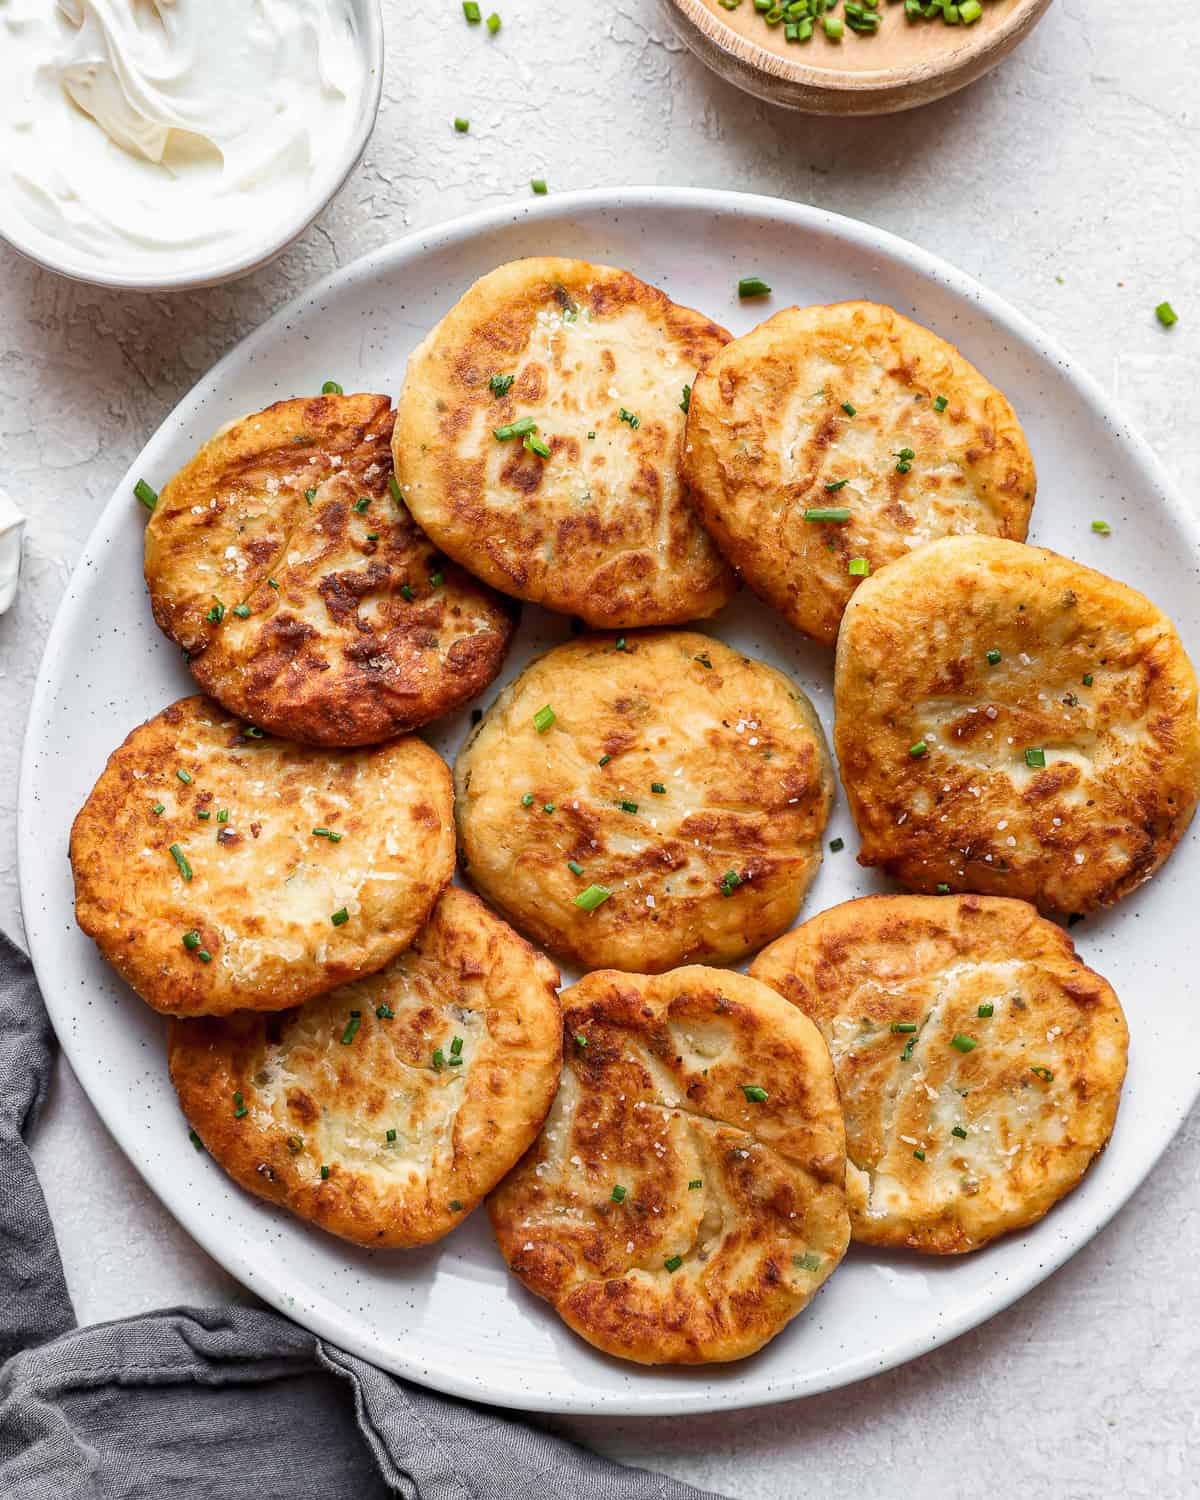 potato pancakes on a plate with sour cream and chives.